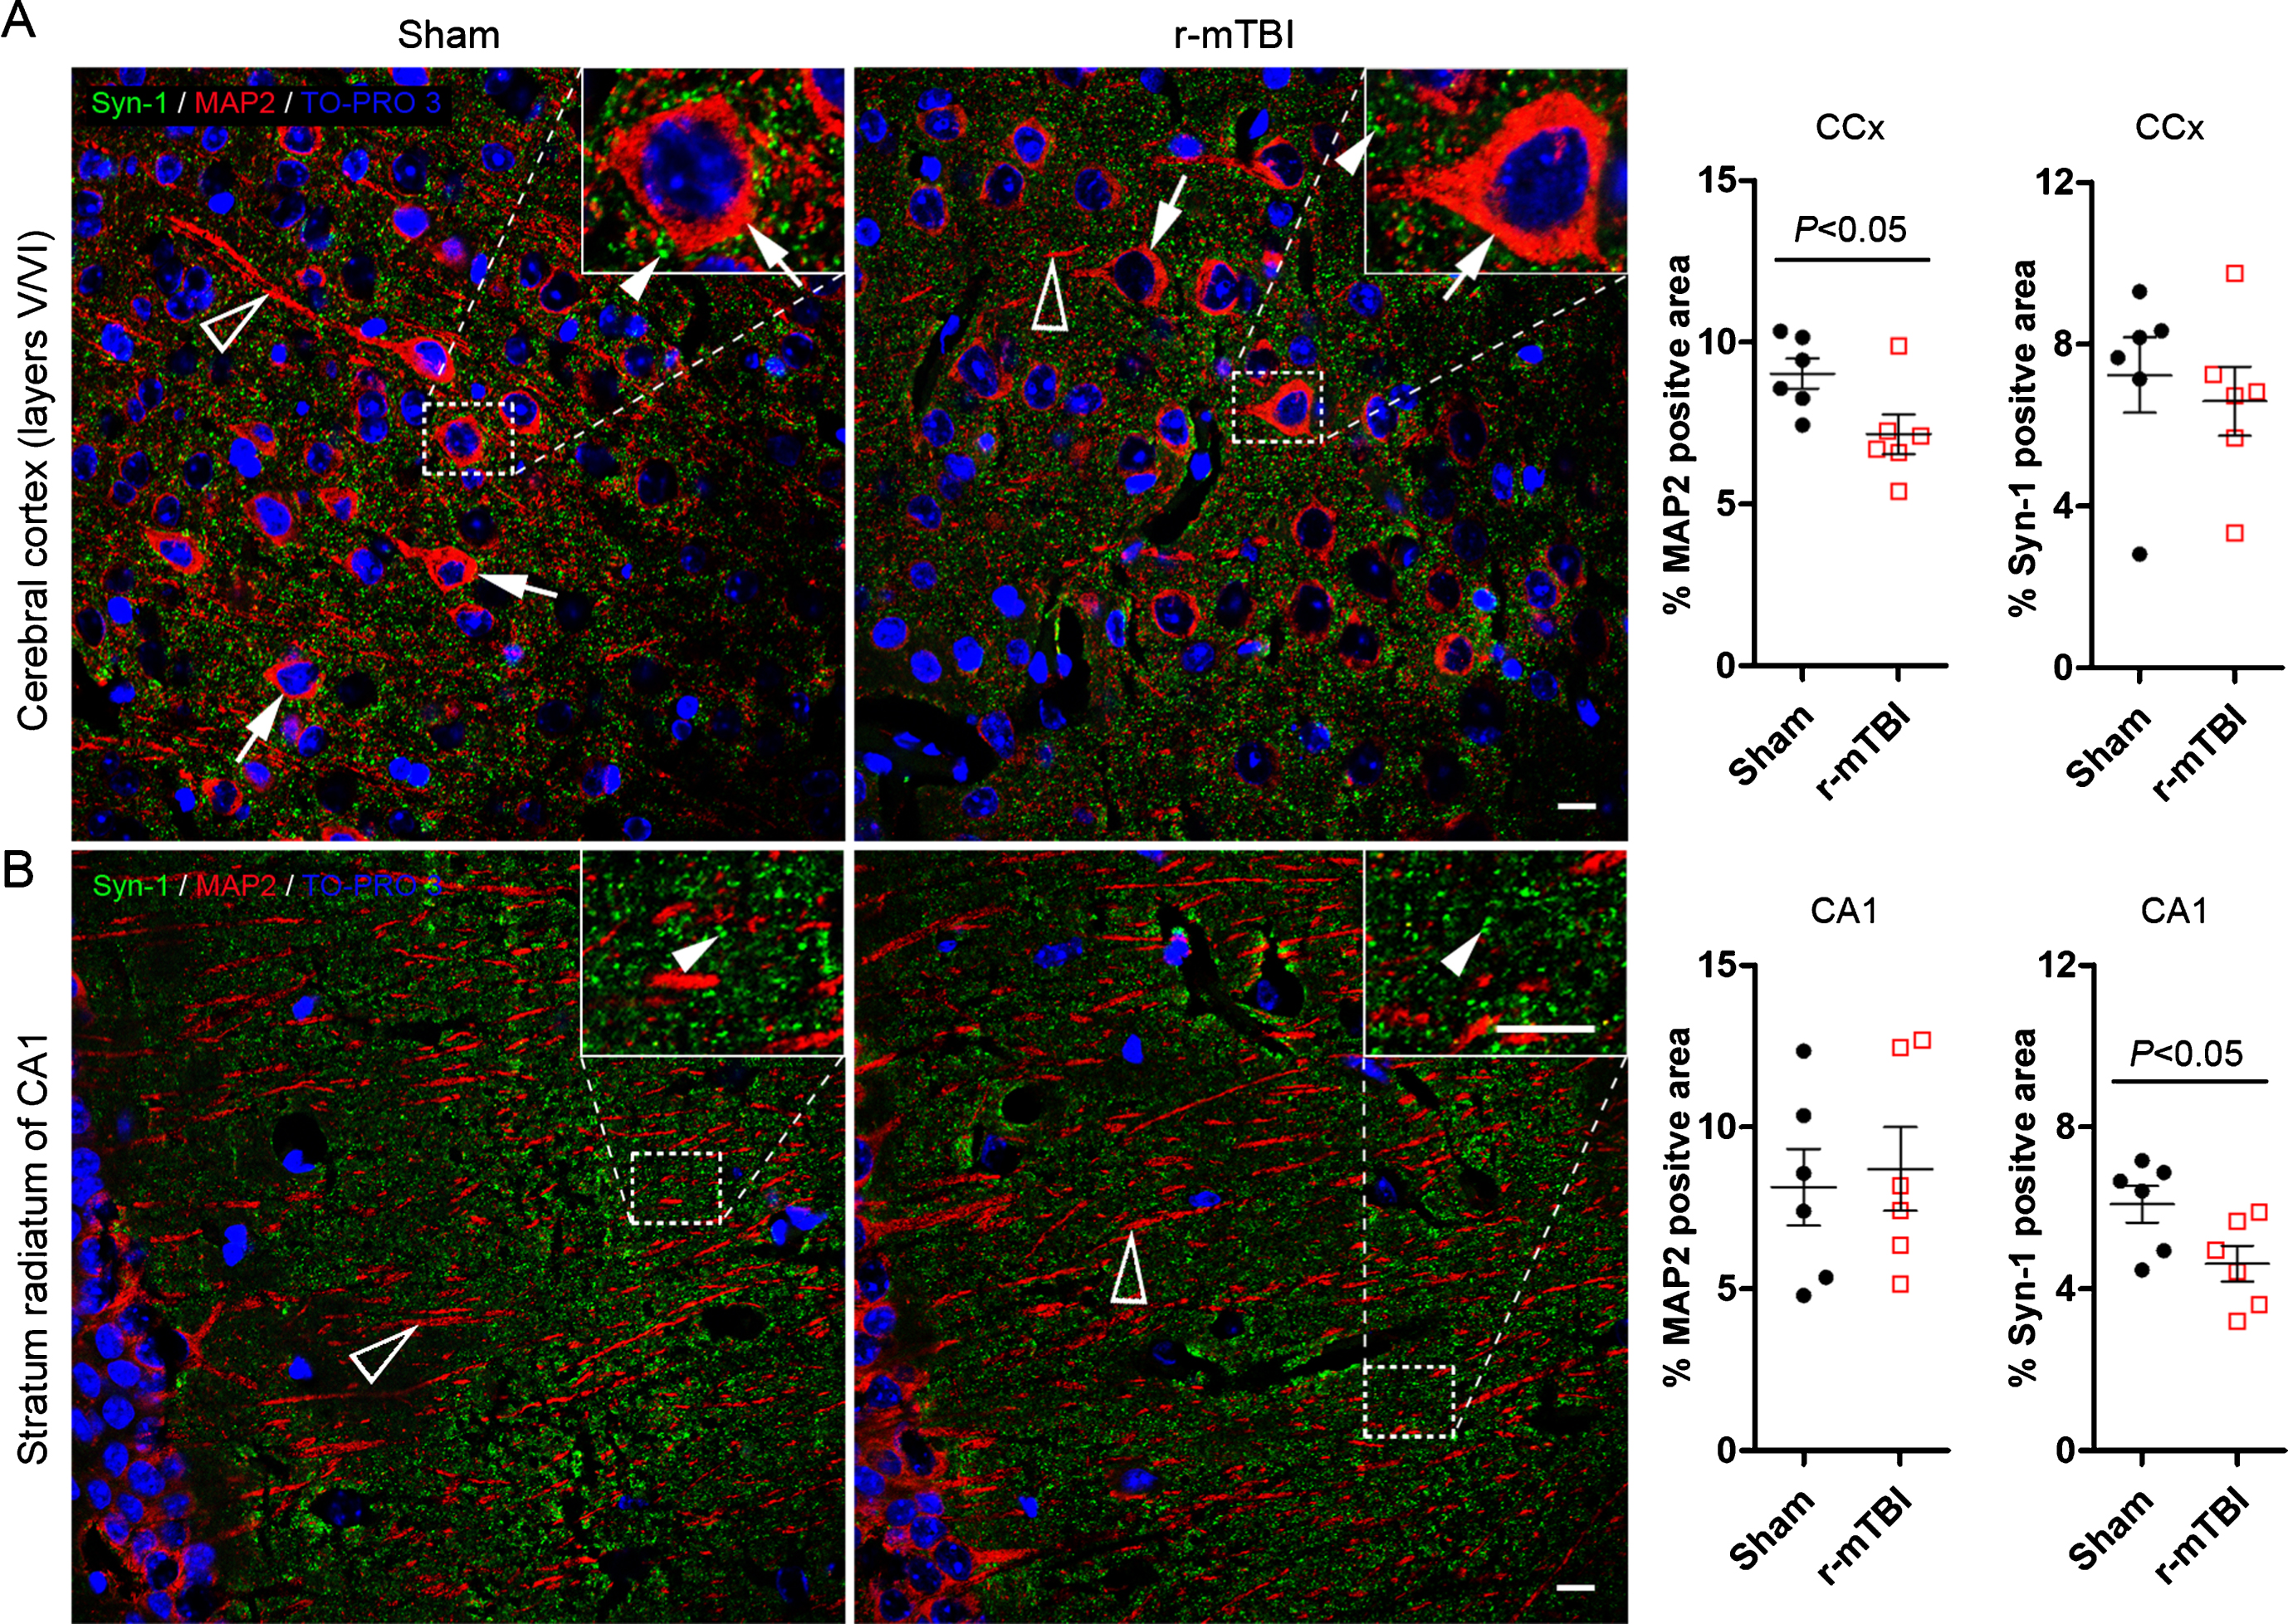 Repetitive mild TBI induces dendritic and synaptic degeneration in 3xTg-AD mice. Brain sections were double immunofluorescent stained for microtubule-associated protein 2 (MAP2) and synapsin-1 (Syn-1), as somatodendritic and presynaptic markers, respectively. Representative photomicrographs show the staining and quantification in cerebral cortex (A) and the striatum radiatum of hippocampal CA1 subfield (B). Data are expressed as scattered dot plots with mean±SEM (n = 6-7 mice/group) and analyzed with unpaired Student t test. Scale bar = 10μm for all.